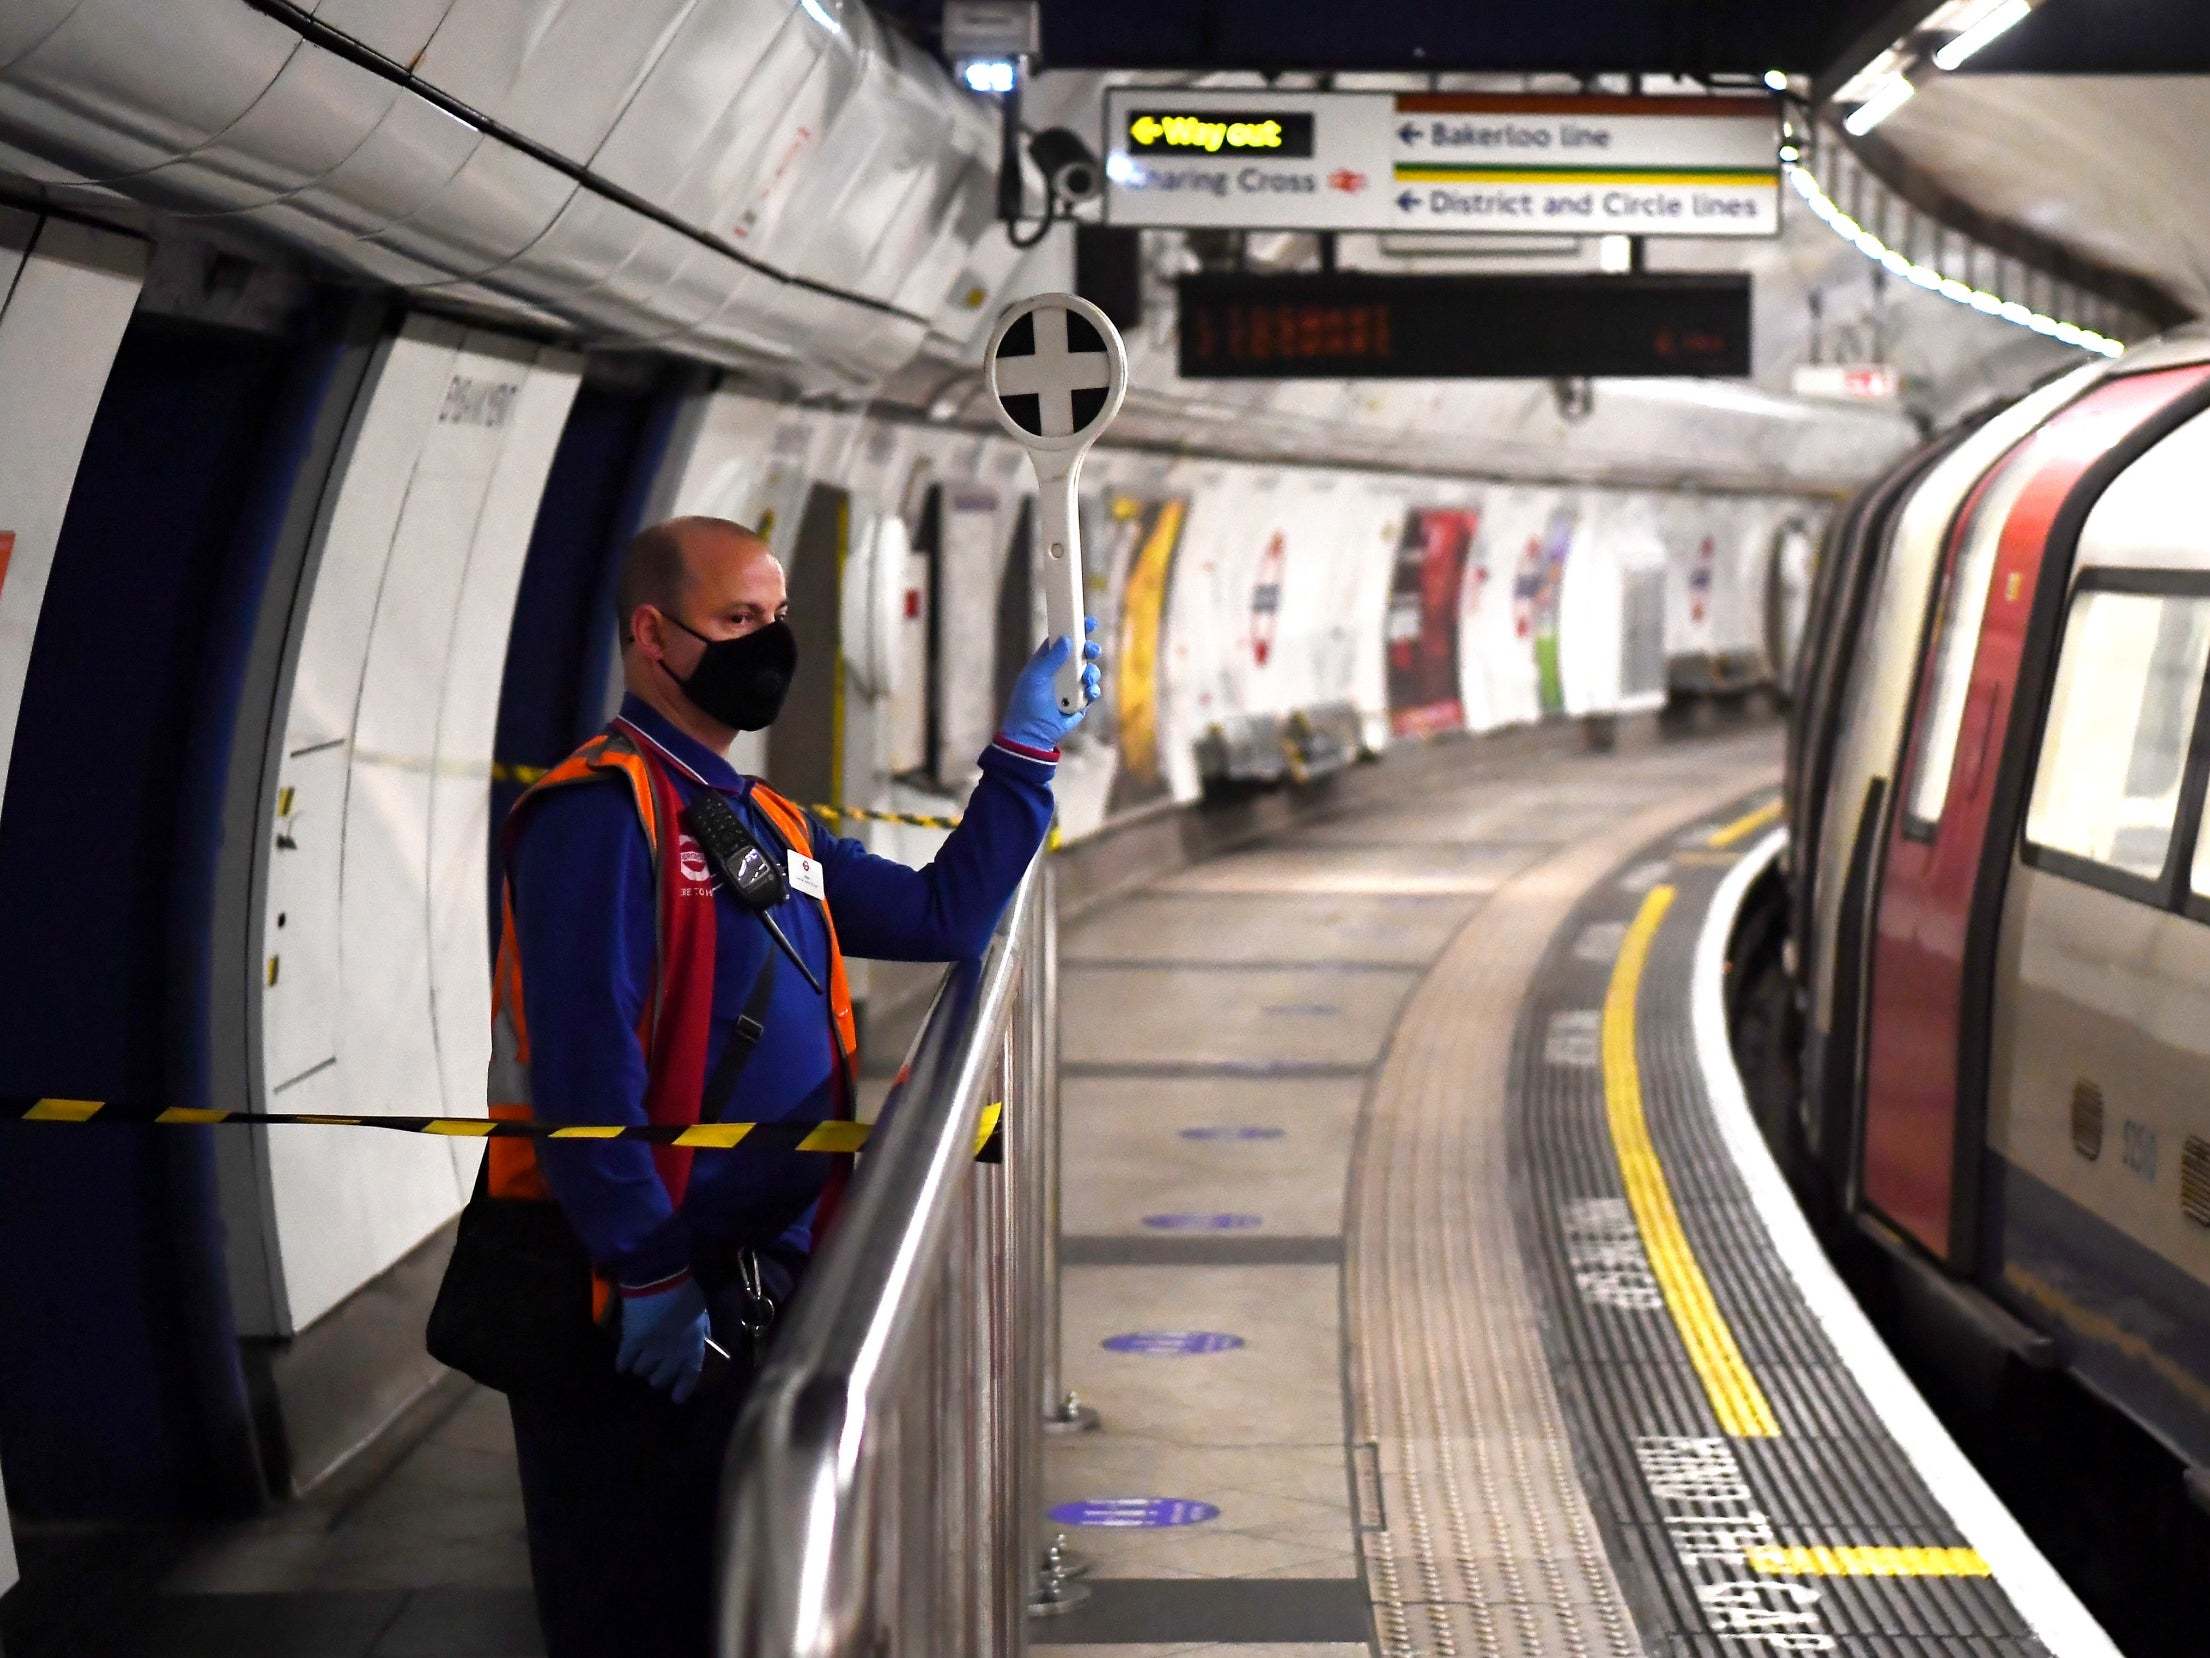 A TfL worker is seen wearing a protective facial covering at Embankment station